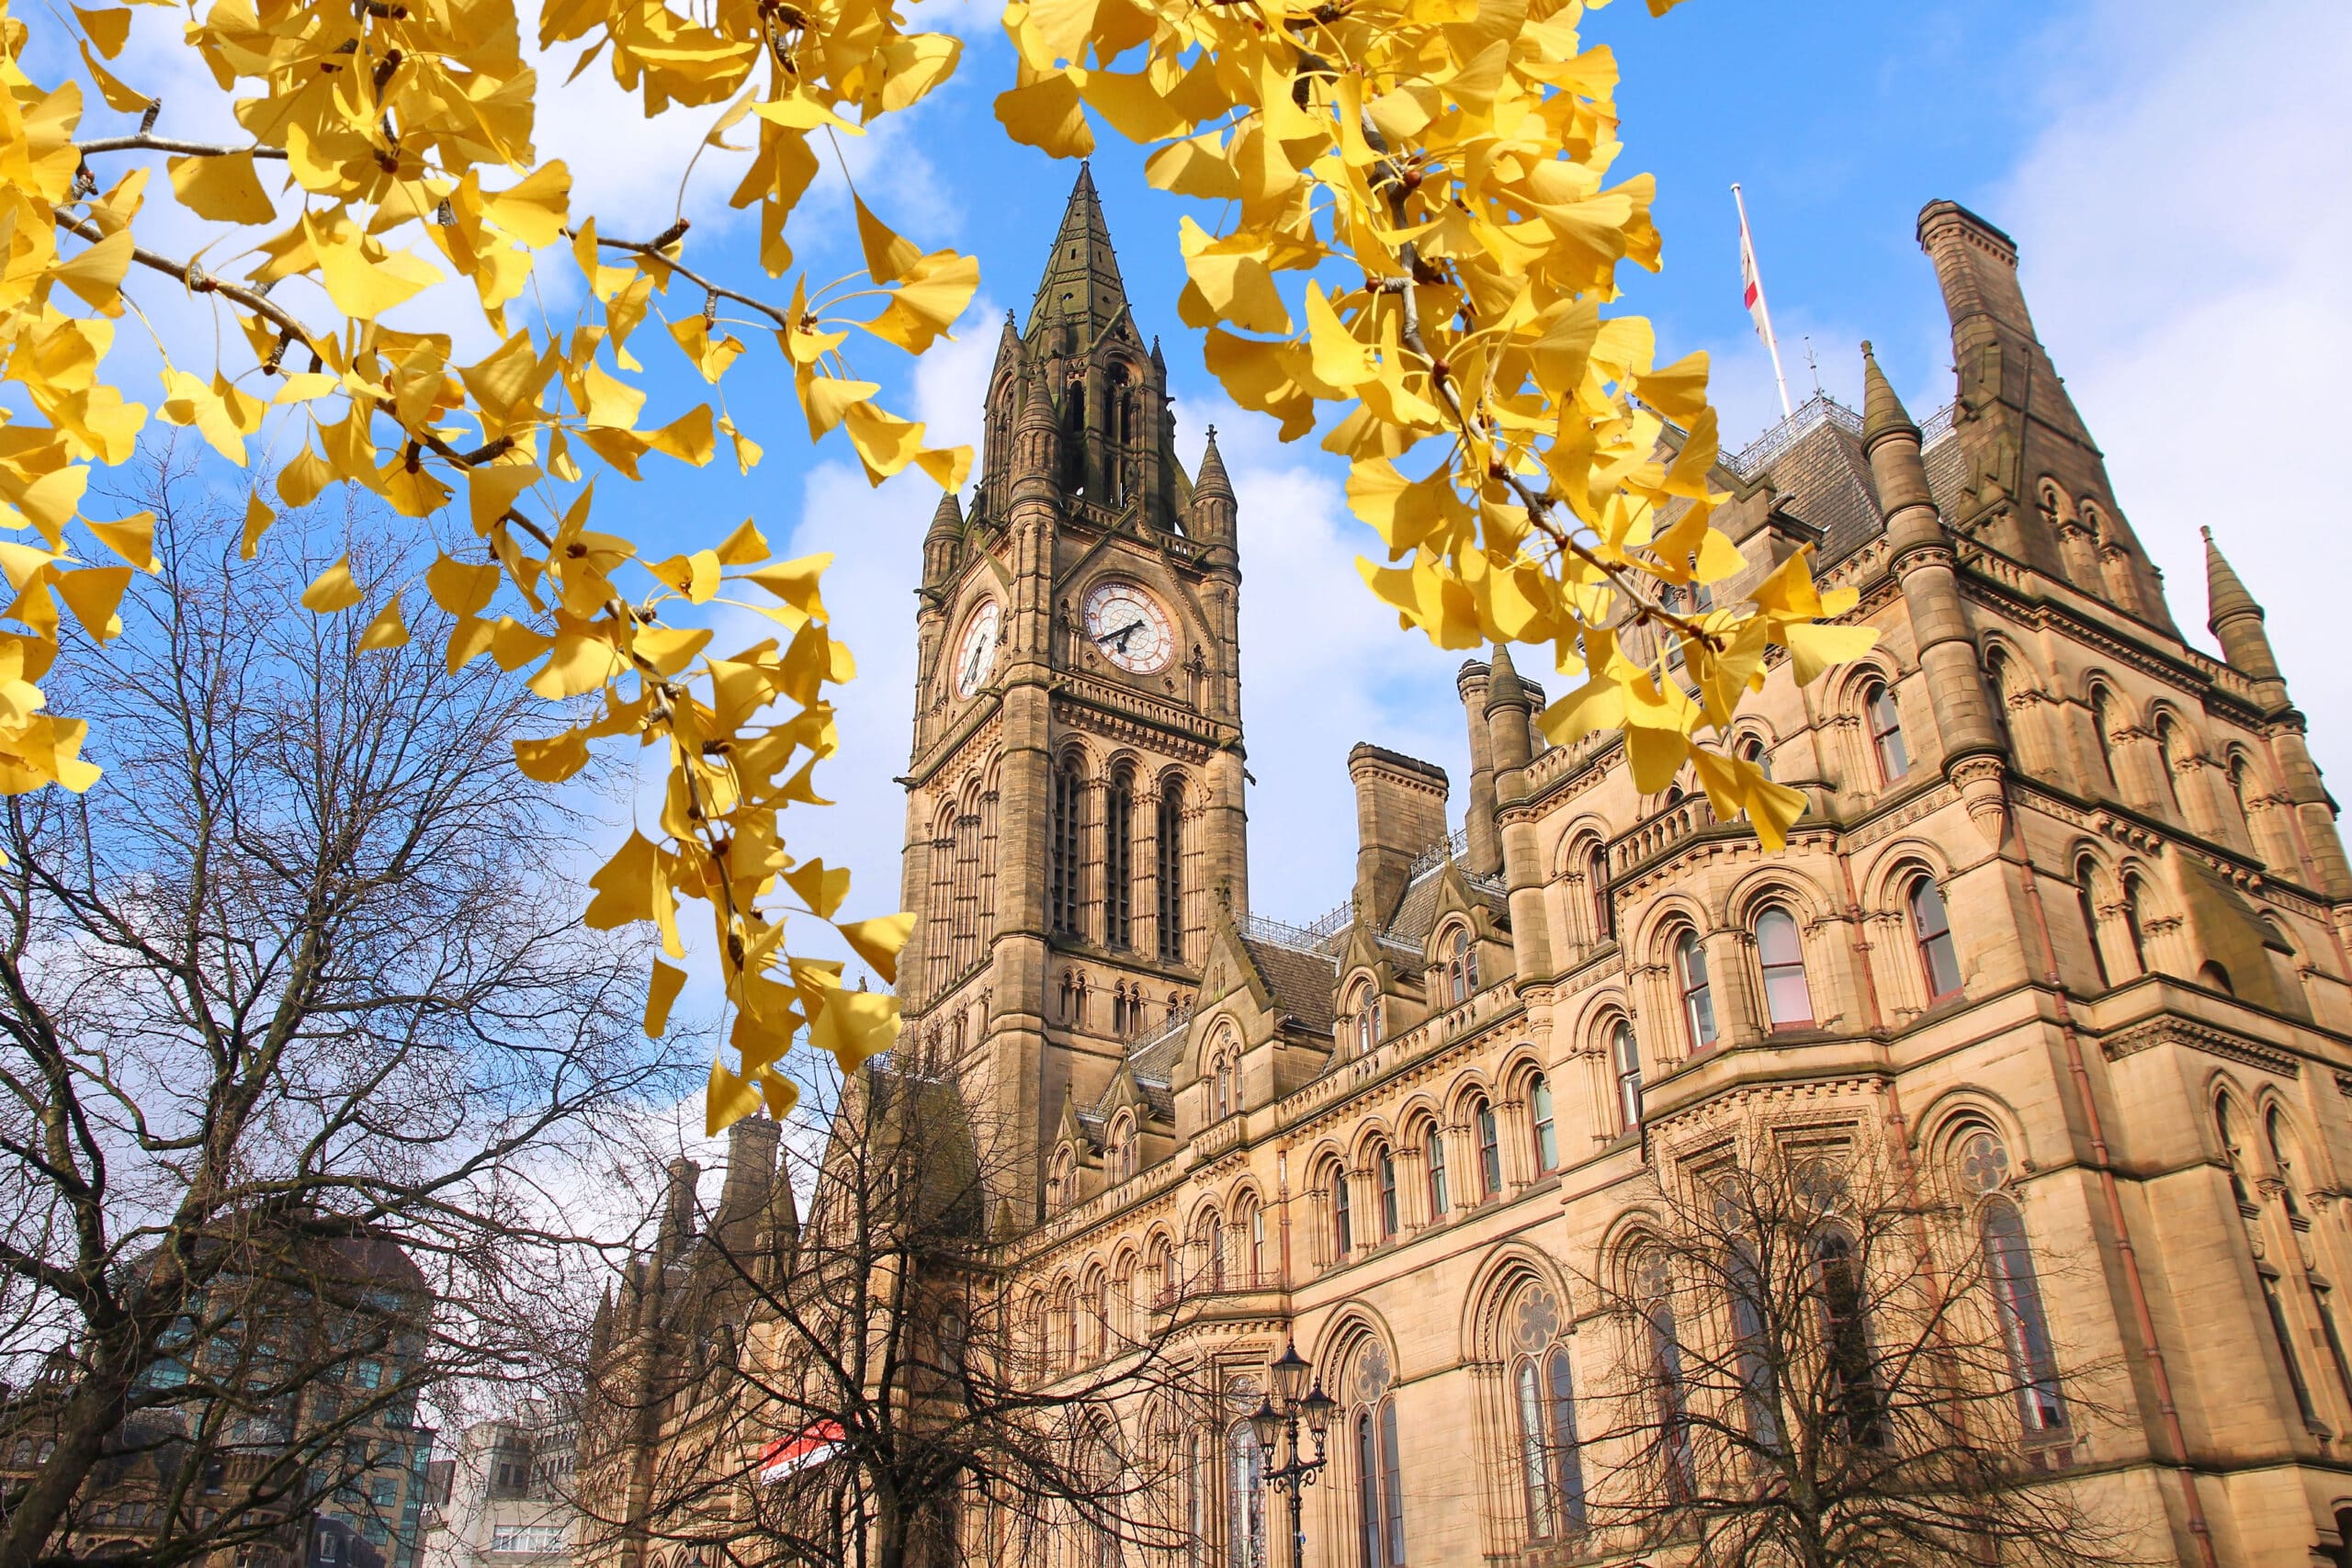 Are There Good Job Opportunities in Manchester?